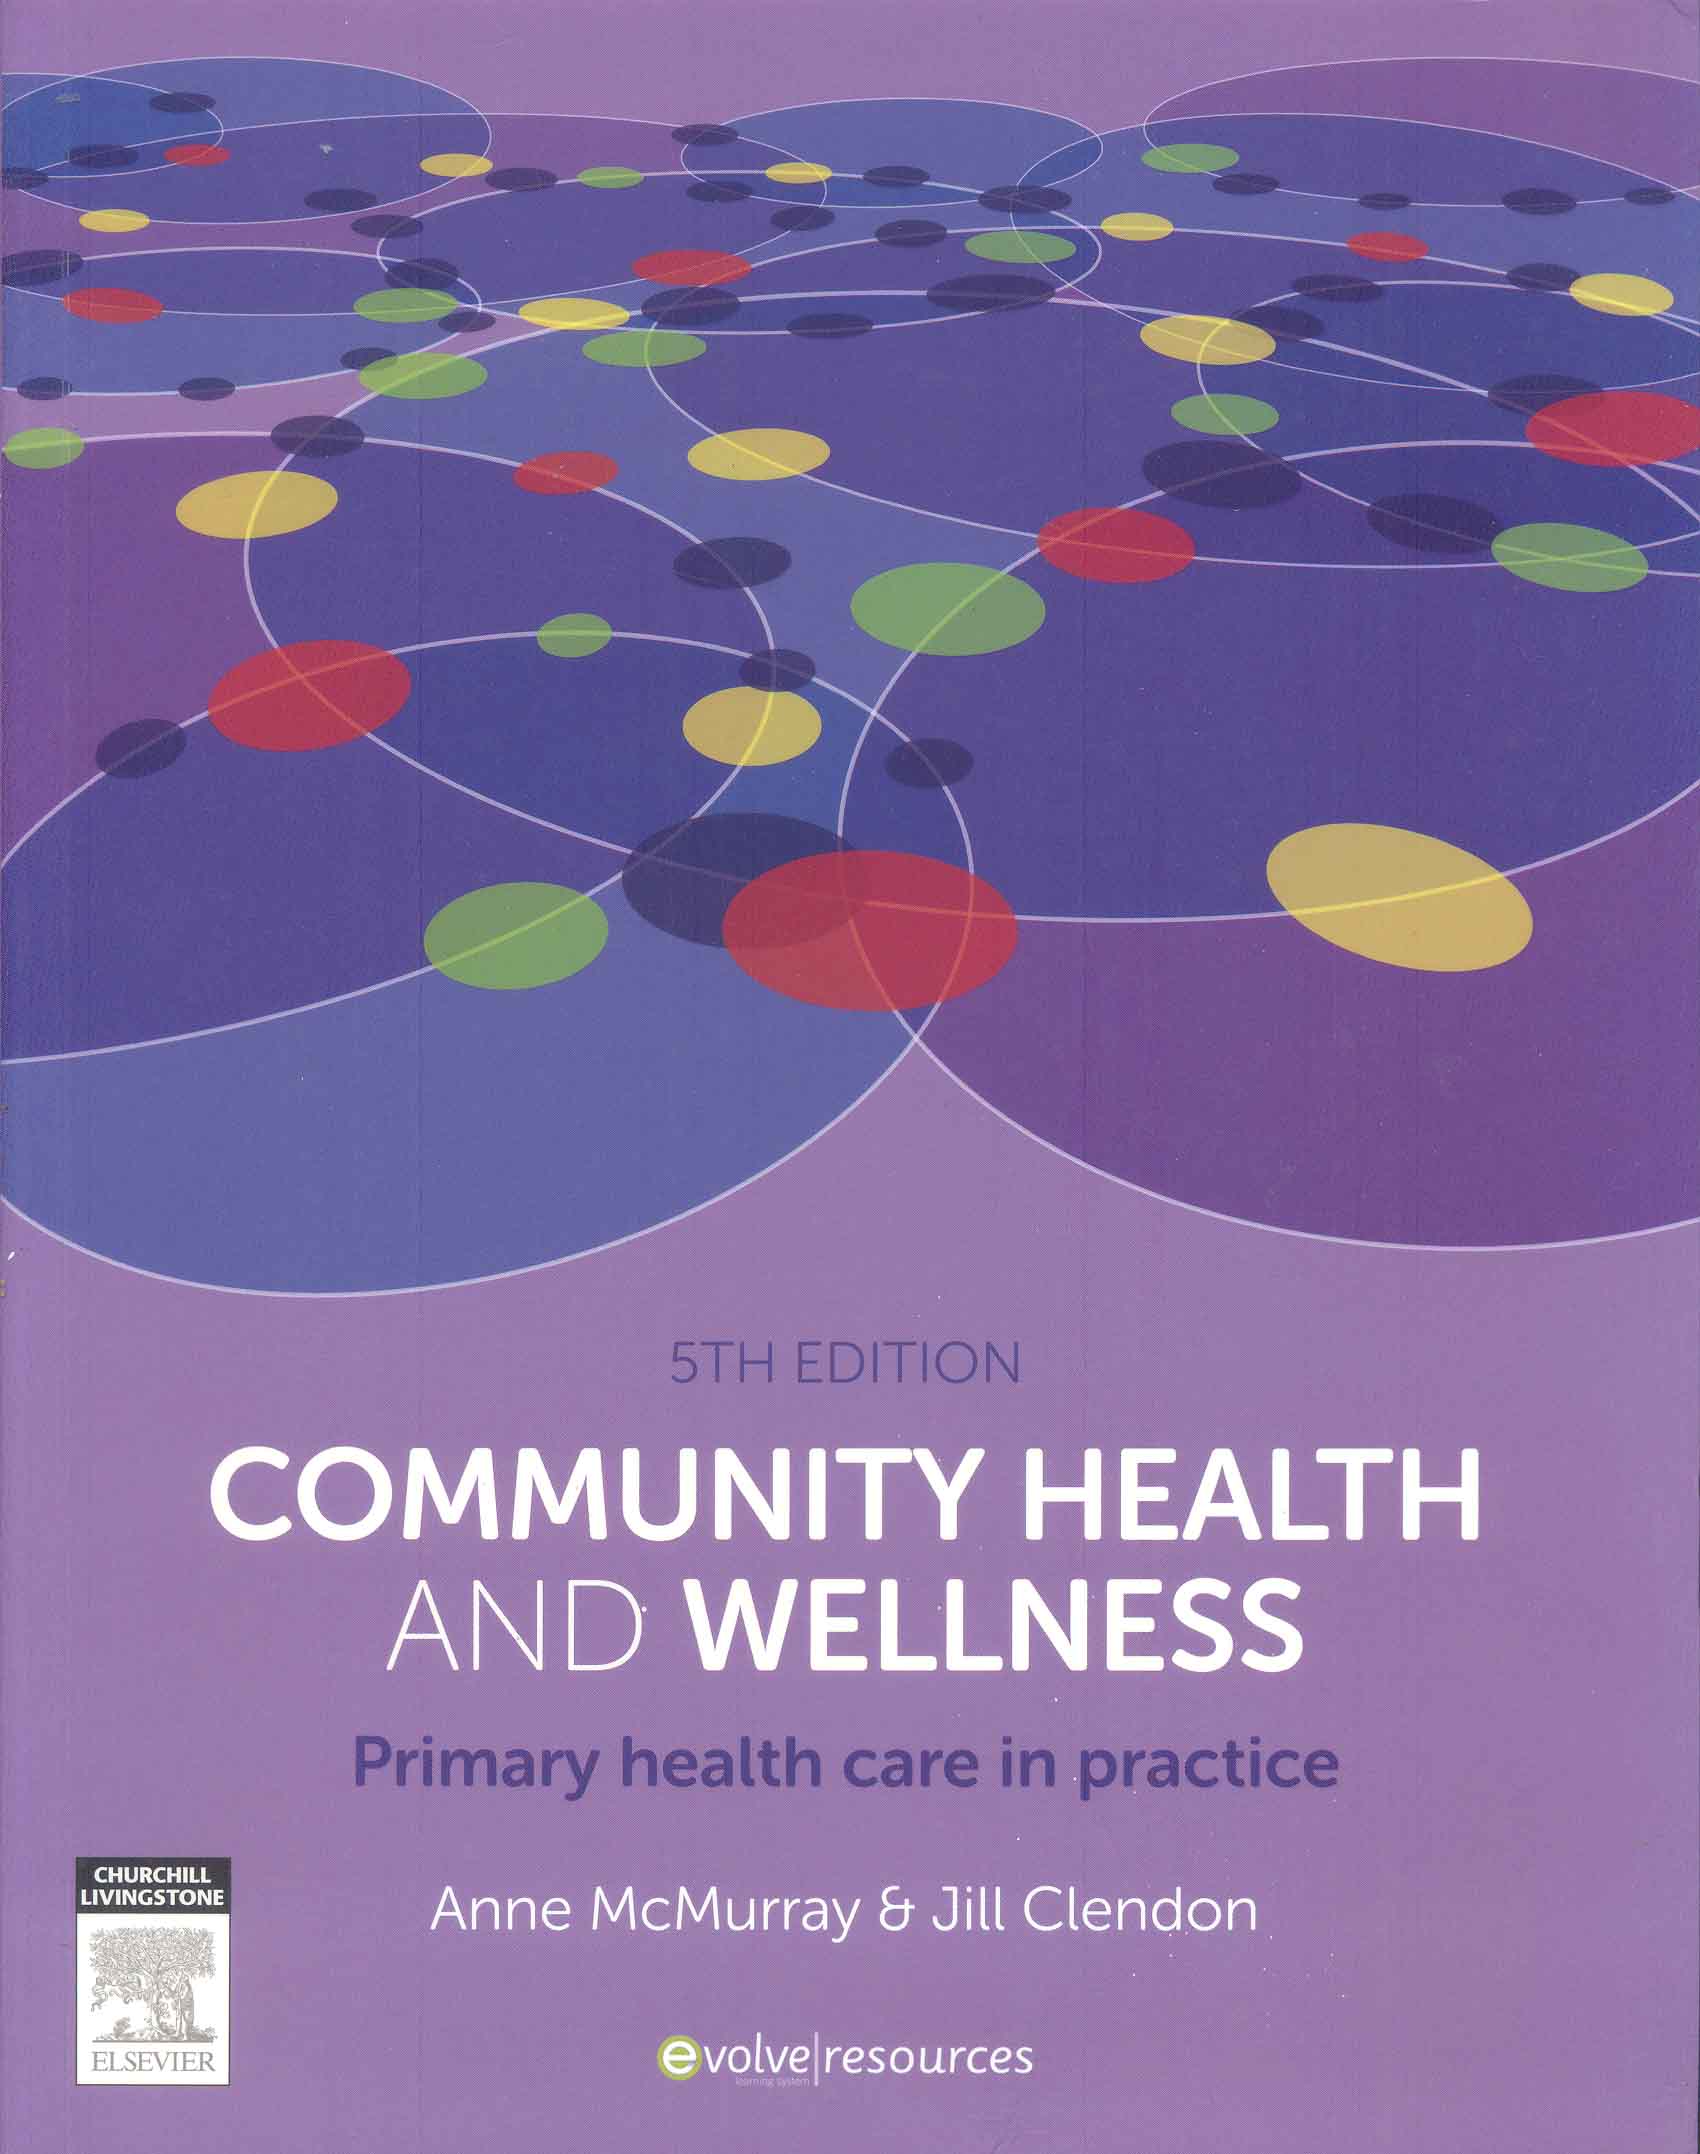 Community health and wellness : primary health care in practice